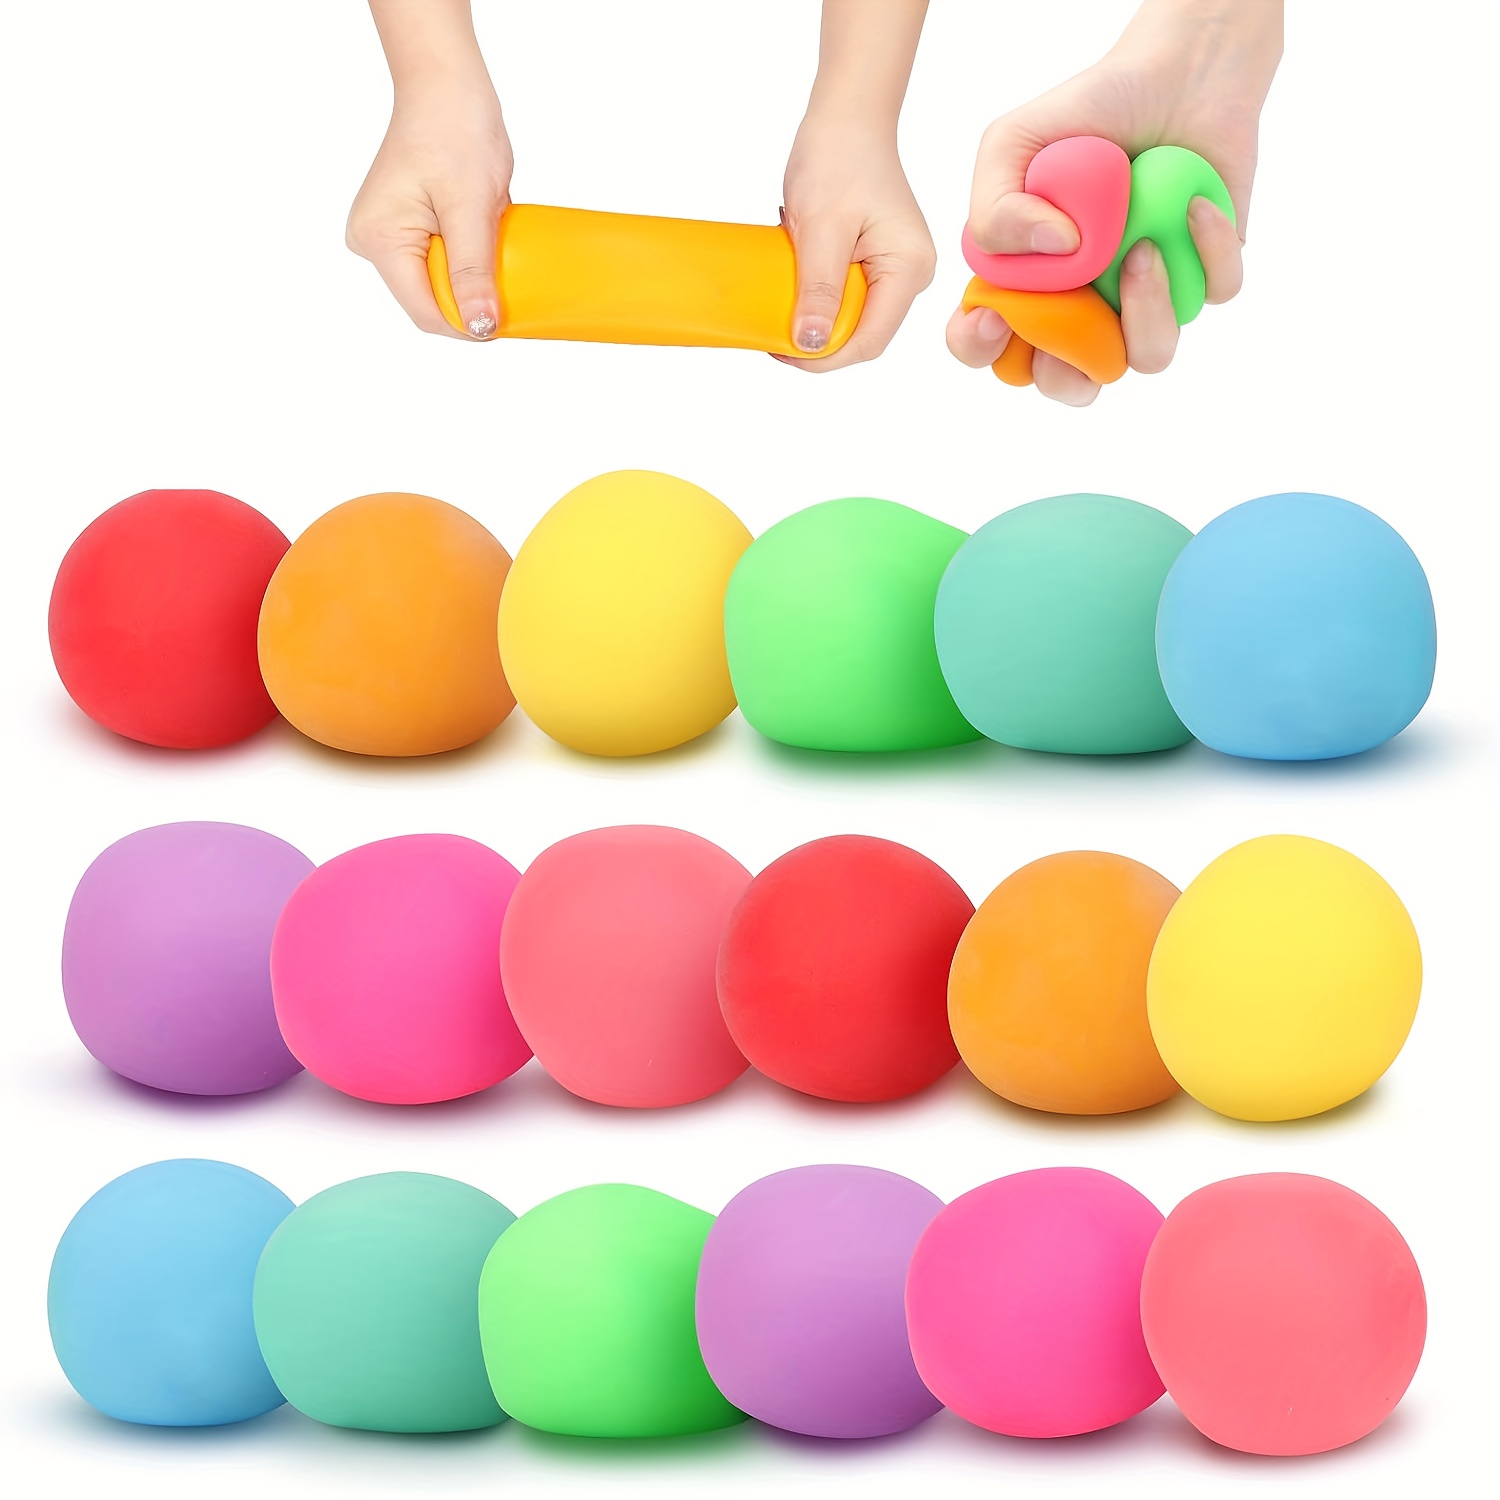 Squeeze Toys,eye Popping Stress Relief Hand Fidget Sensory Toy, Pop Out  Eyes Anti-anxiety Office Desk Squishy Toys, Green 12pcs